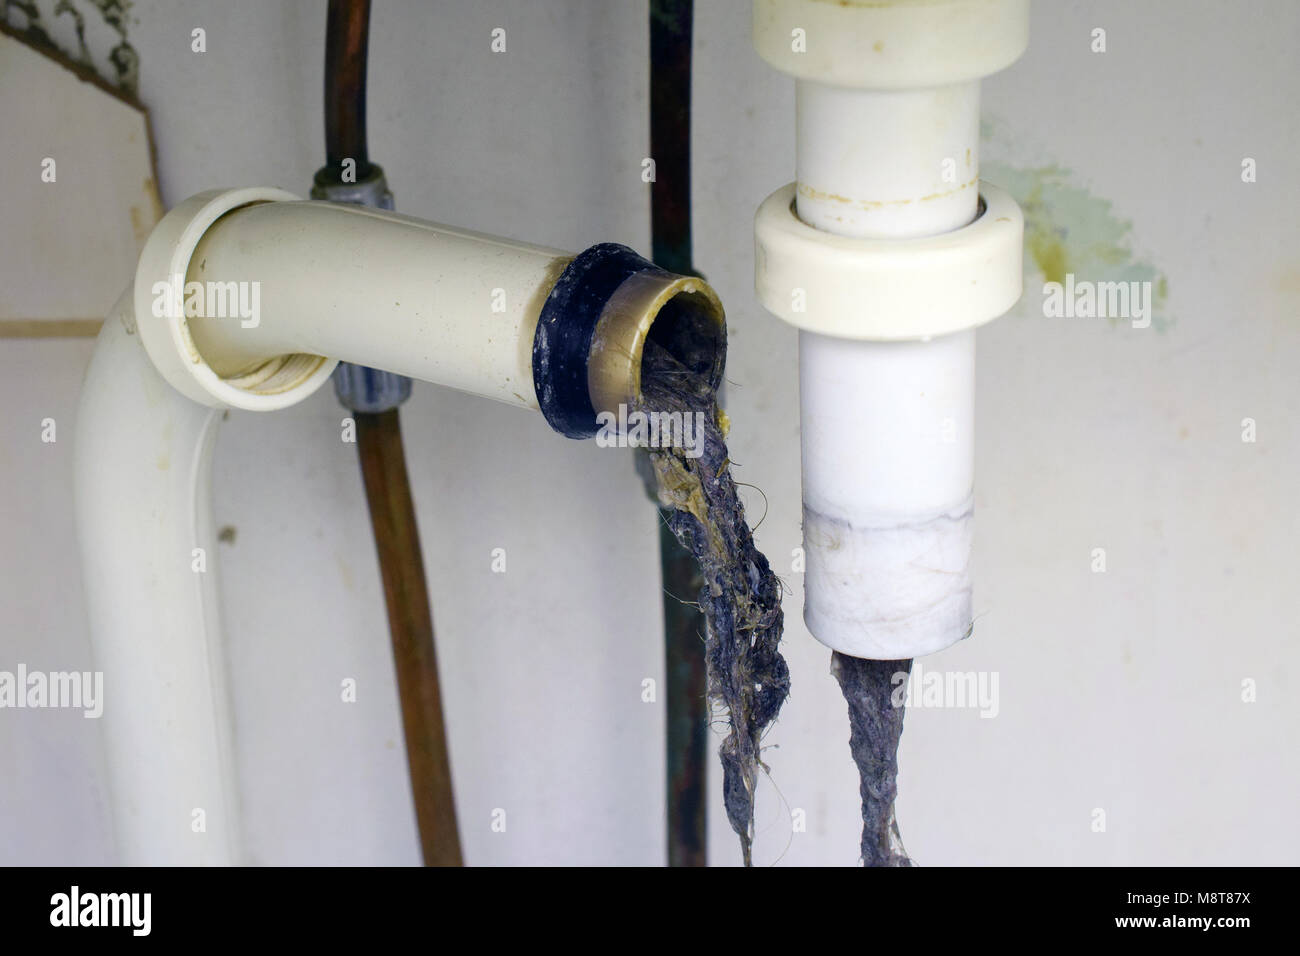 https://c8.alamy.com/comp/M8T87X/clogged-sink-pipe-unclog-a-drain-from-hairs-and-other-stuff-M8T87X.jpg